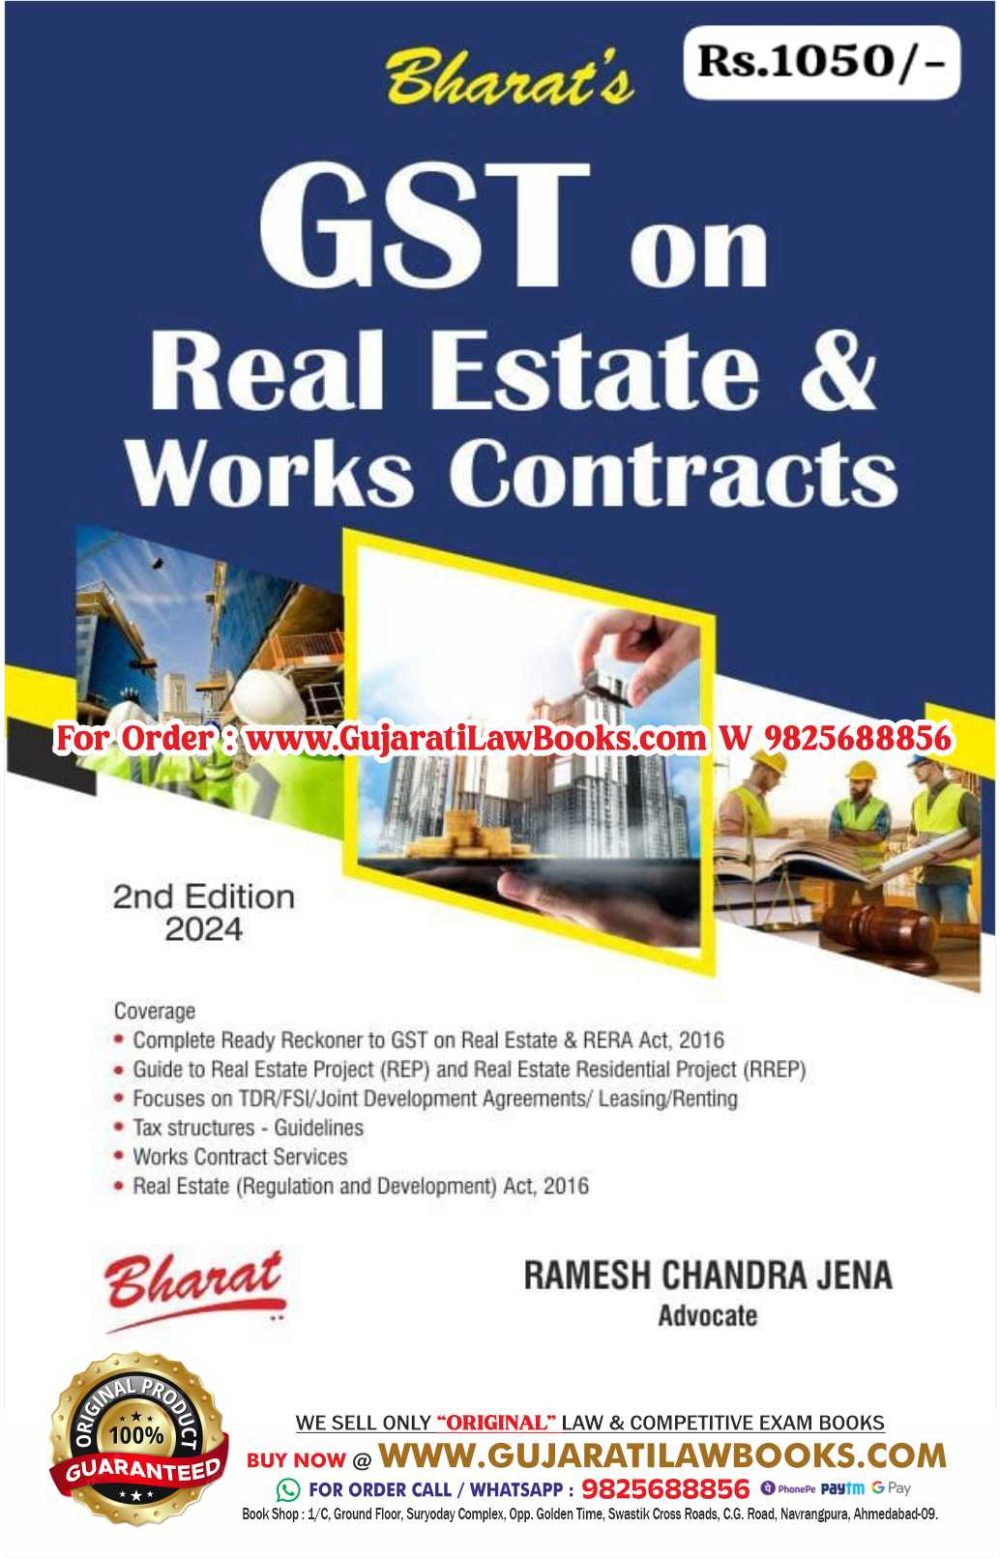 Bharat's GST on Real Estate & Work Contracts - Latest 2nd Edition 2024